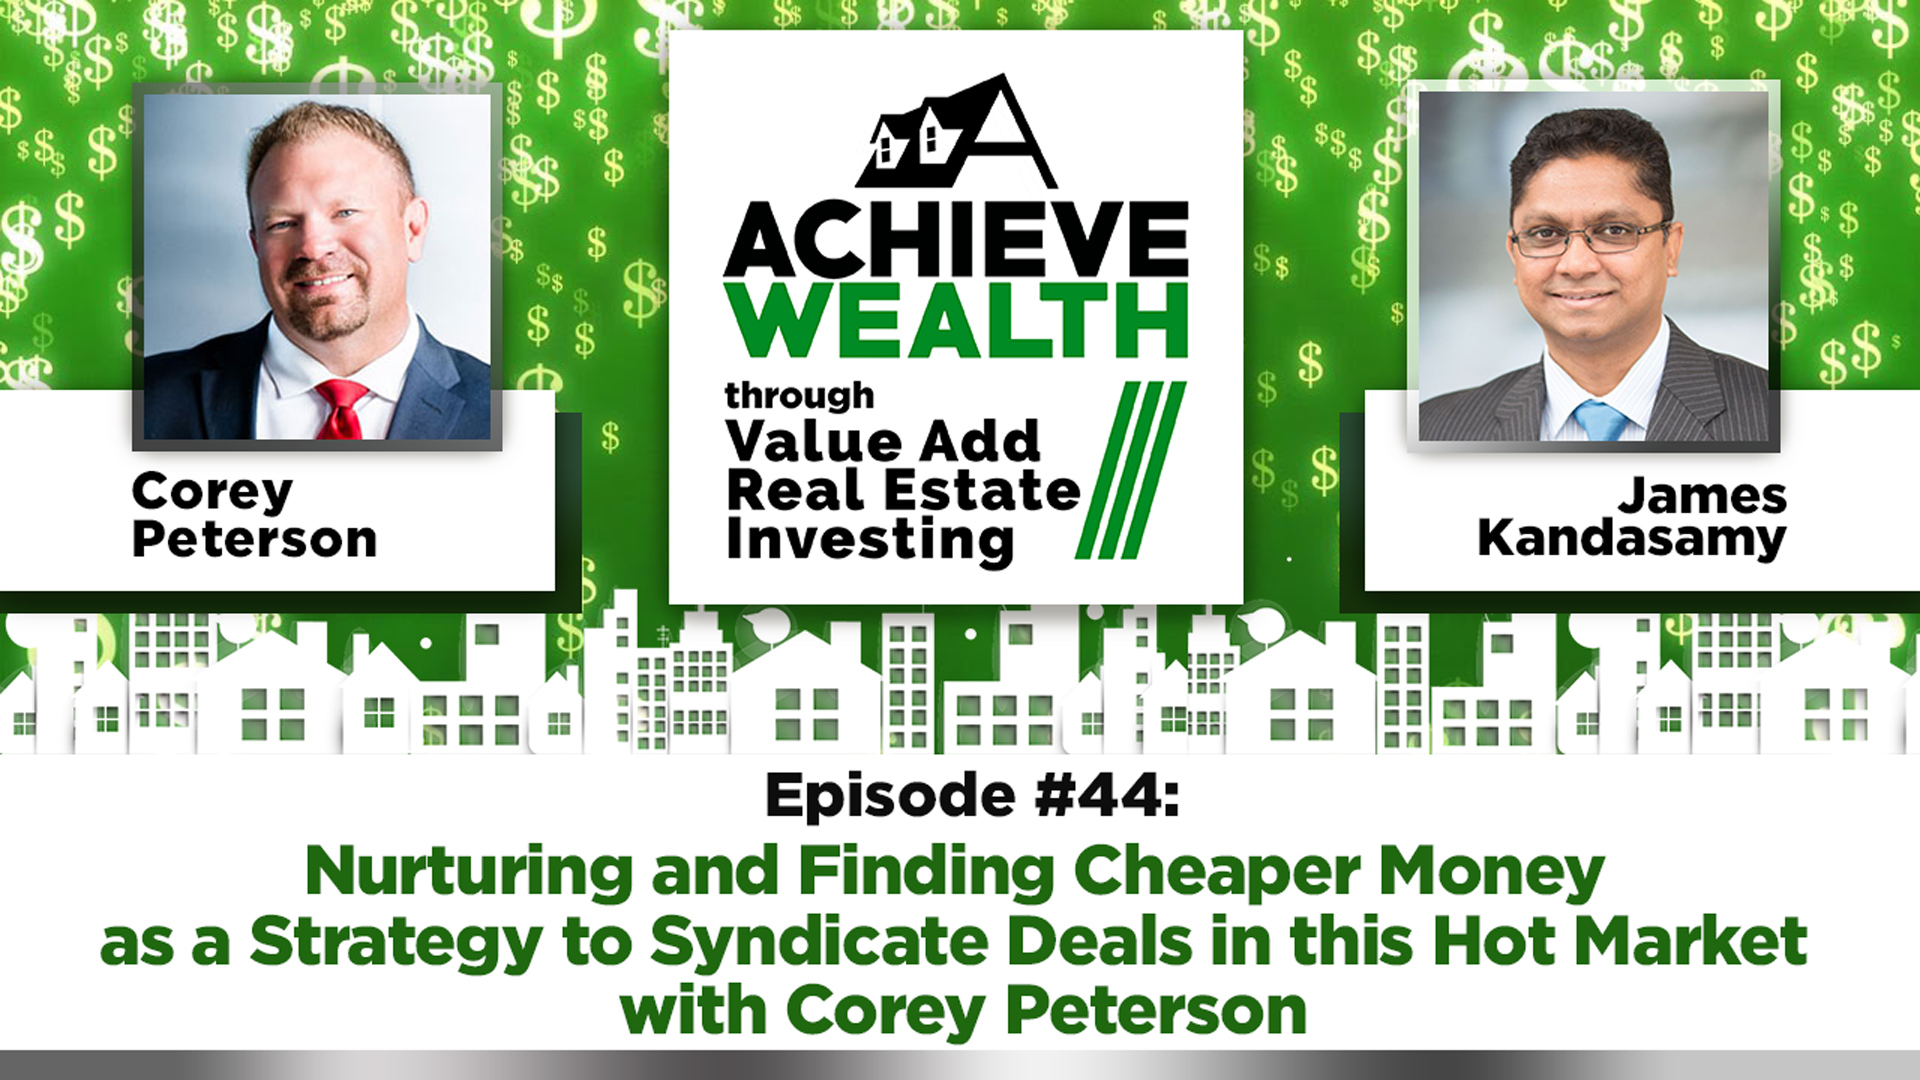 Ep#44 Nurturing and Finding Cheaper Money as a Strategy to Syndicate Deals with Corey Peterson.